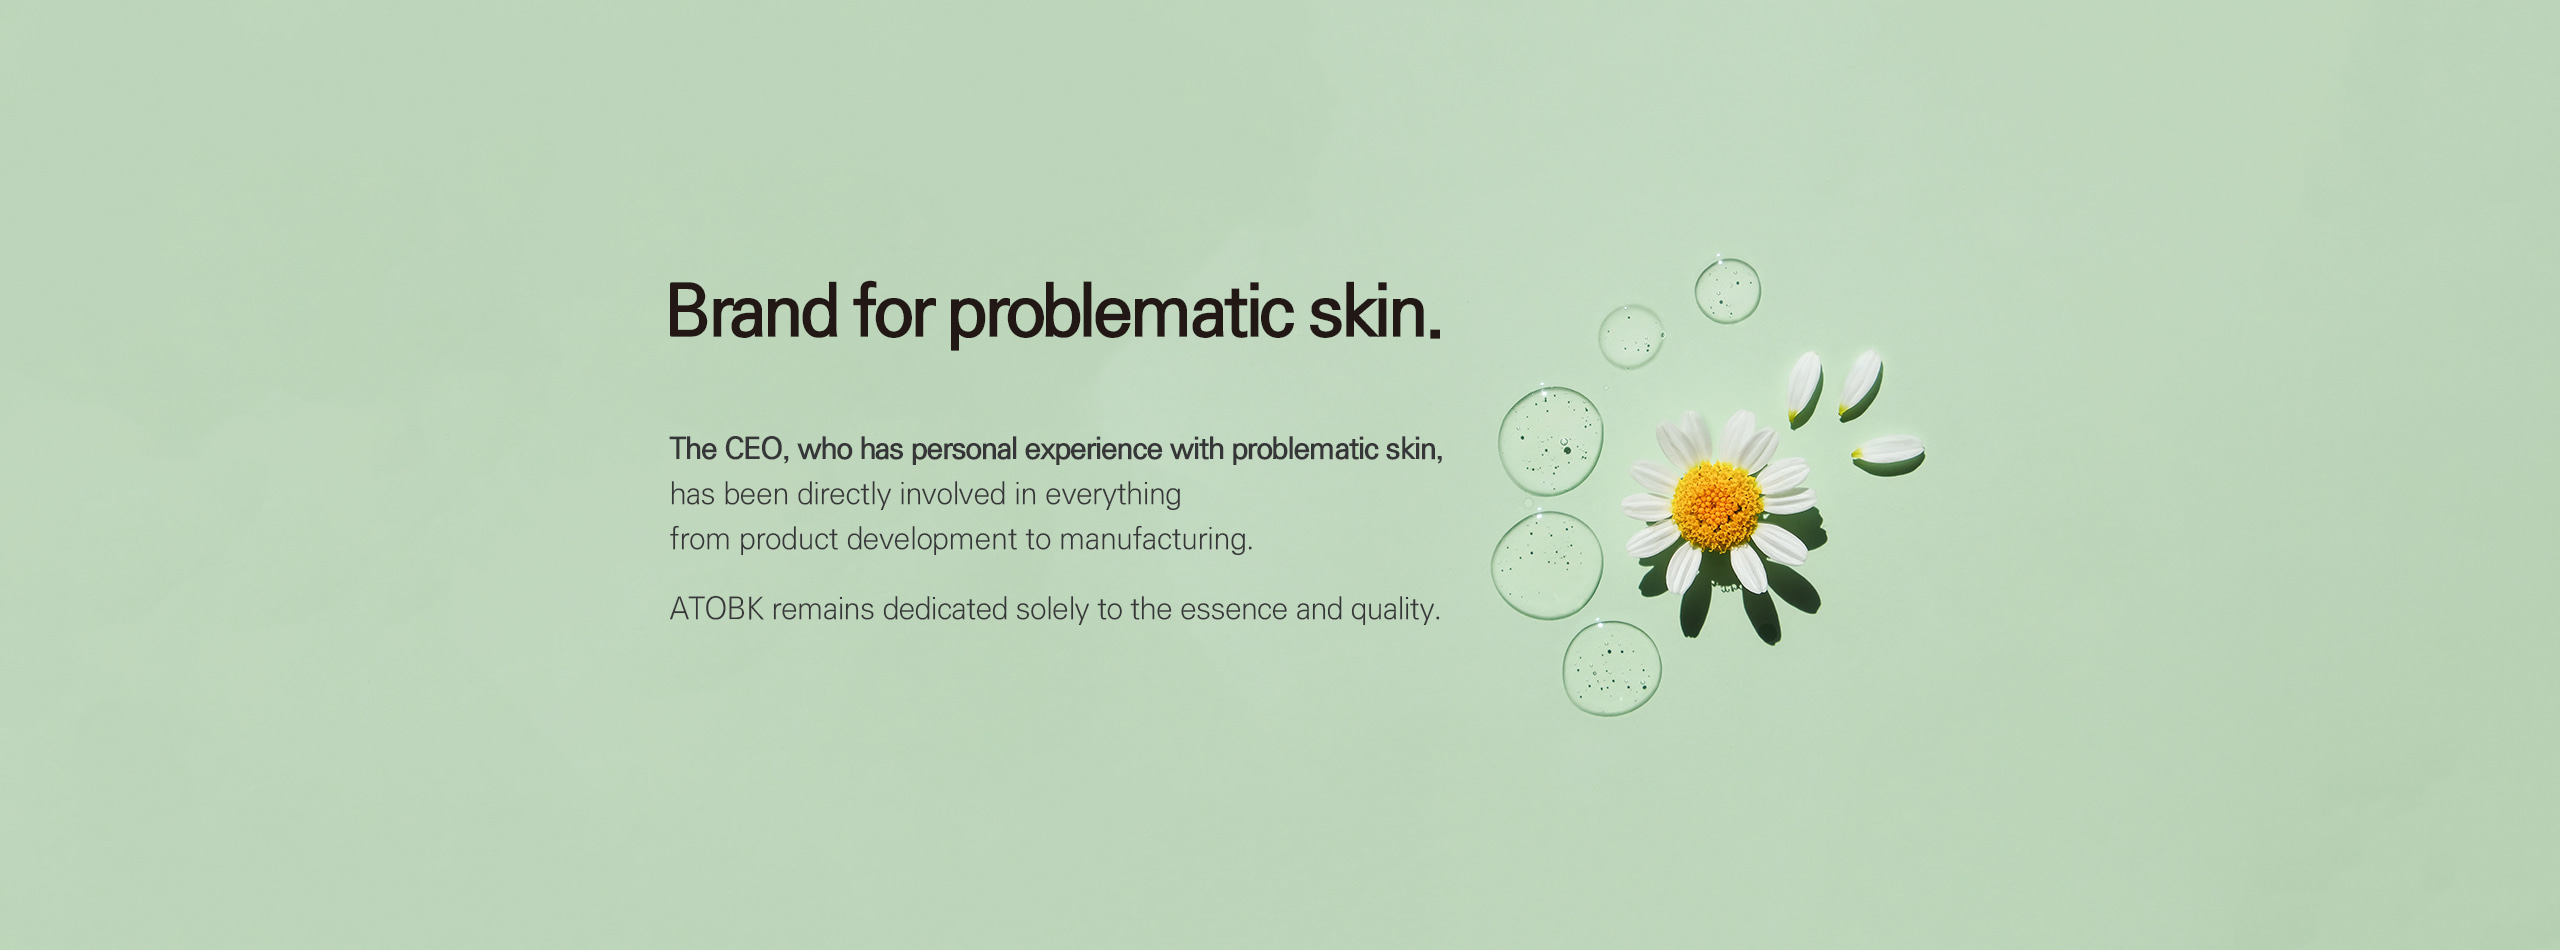 Brand for problematic skin